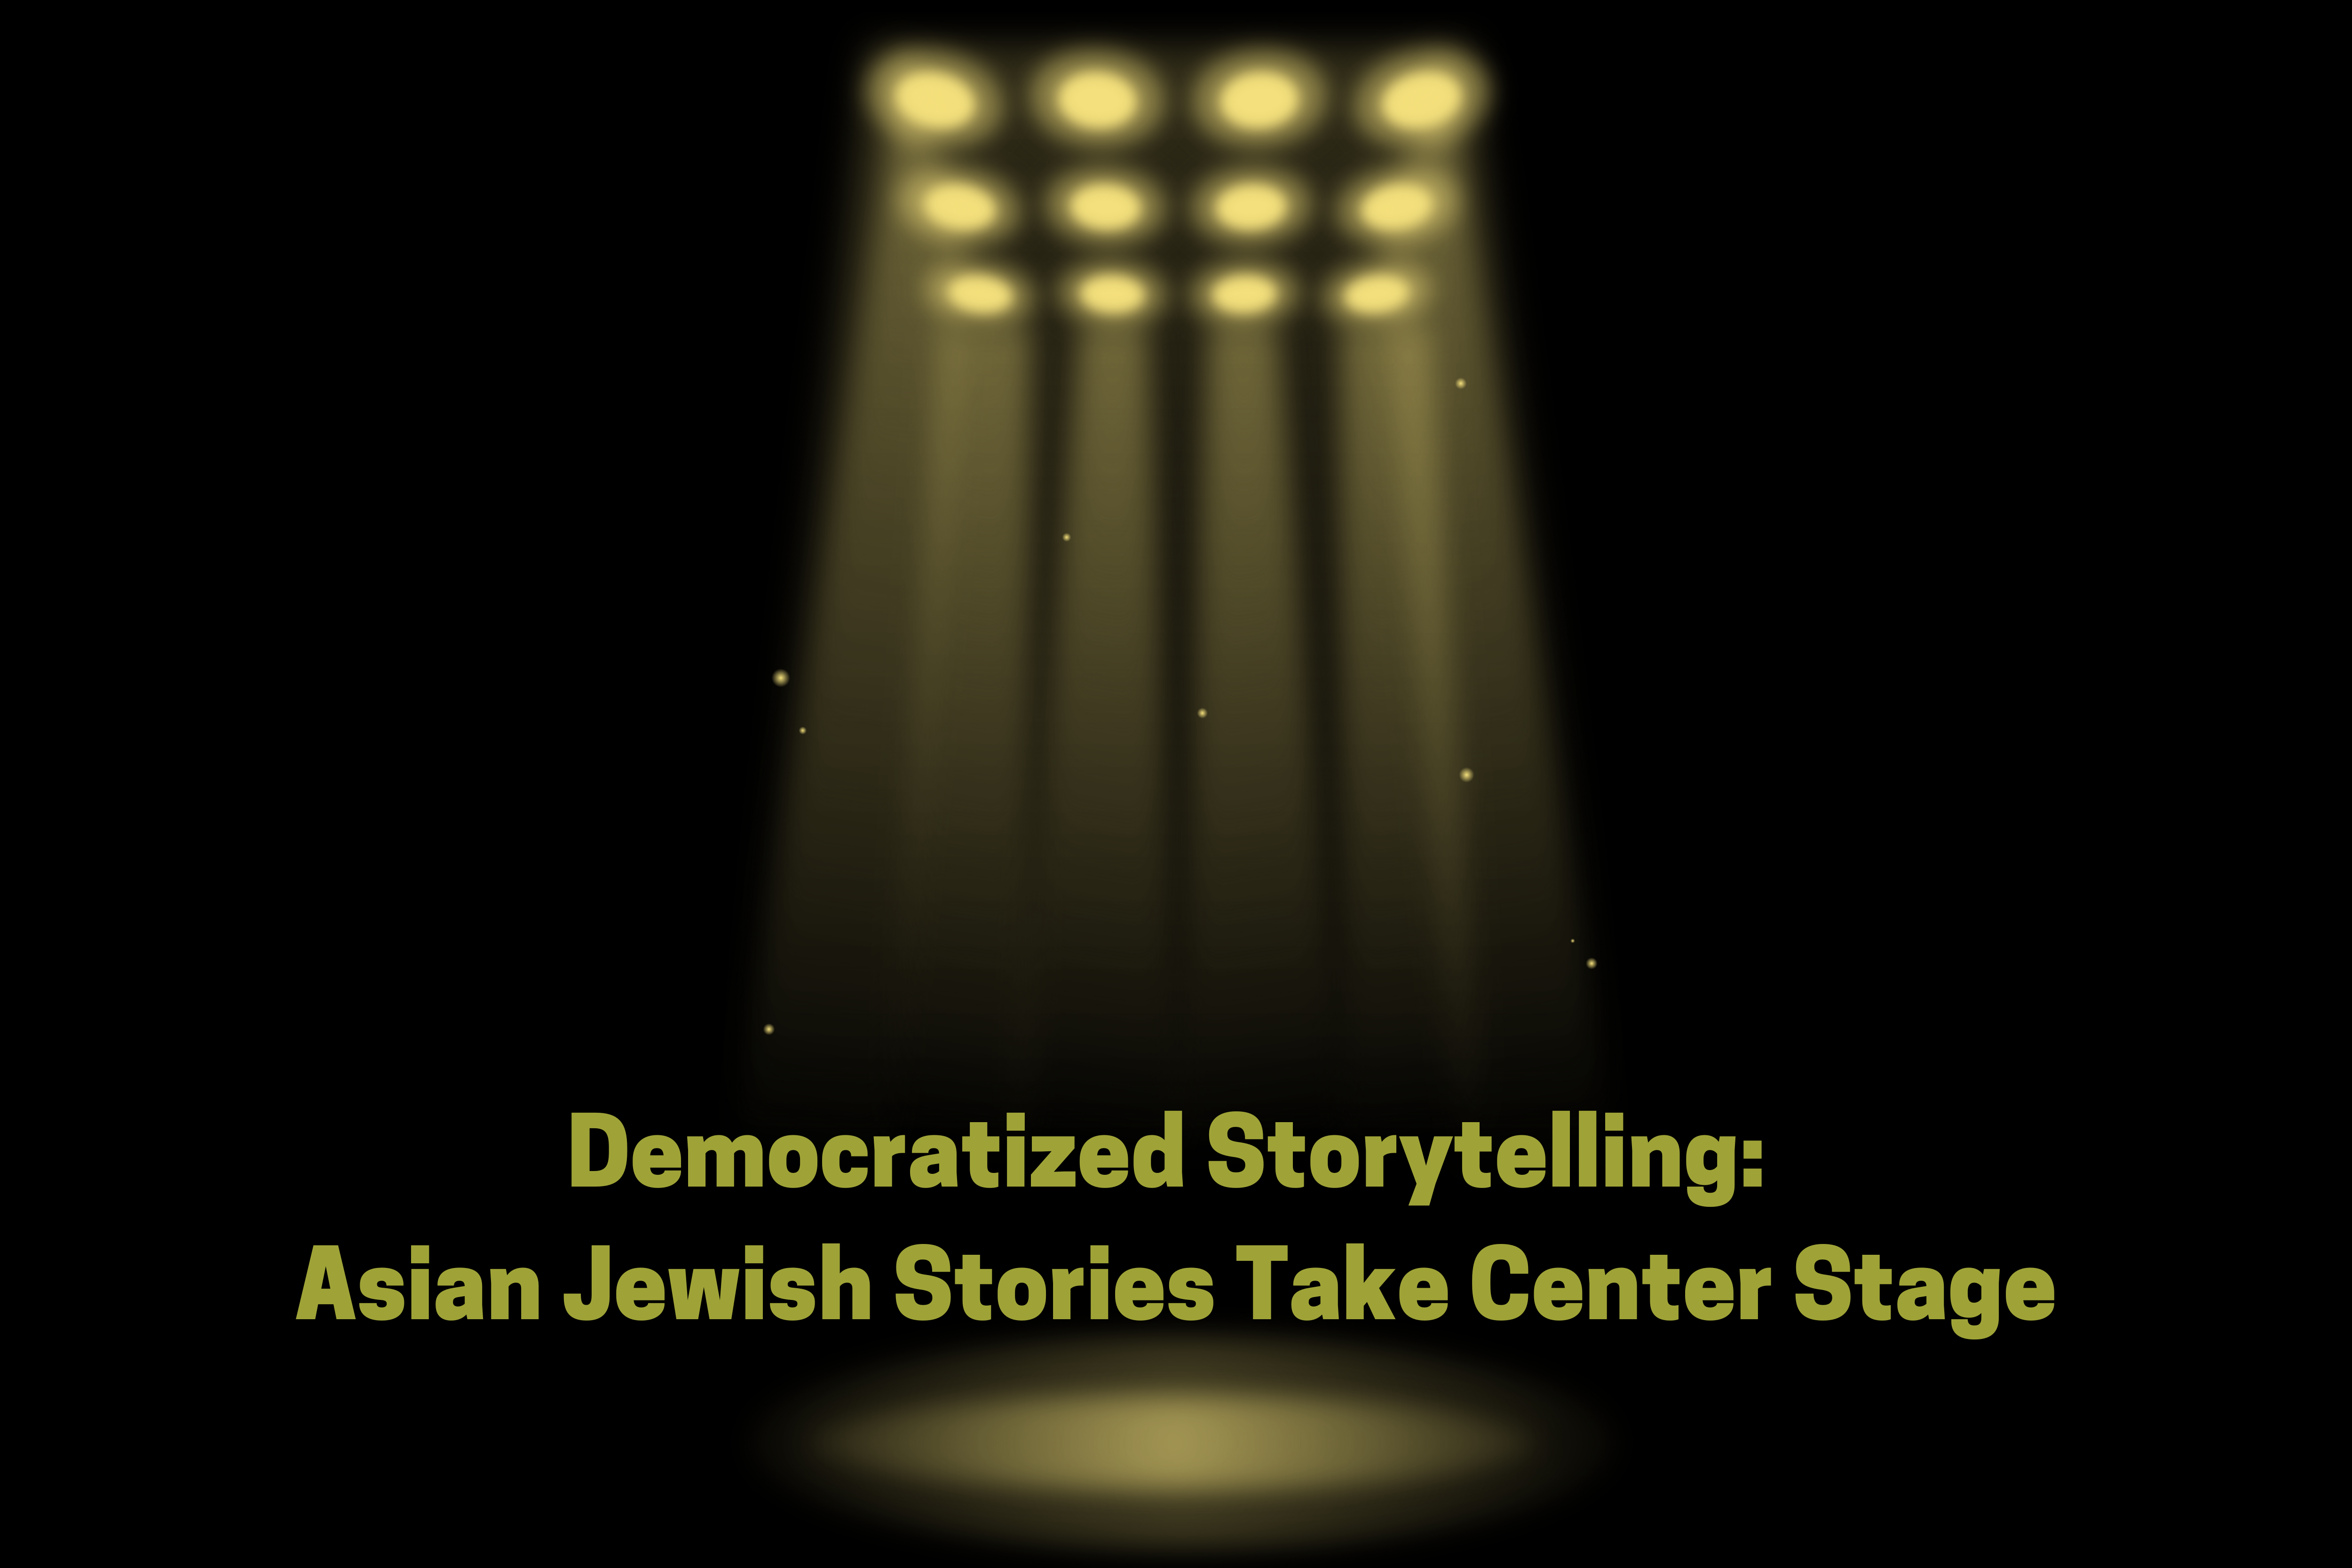 Democratized Storytelling: Asian Jewish Stories Take Center Stage; image shows stage lights illuminating the article title on a black background